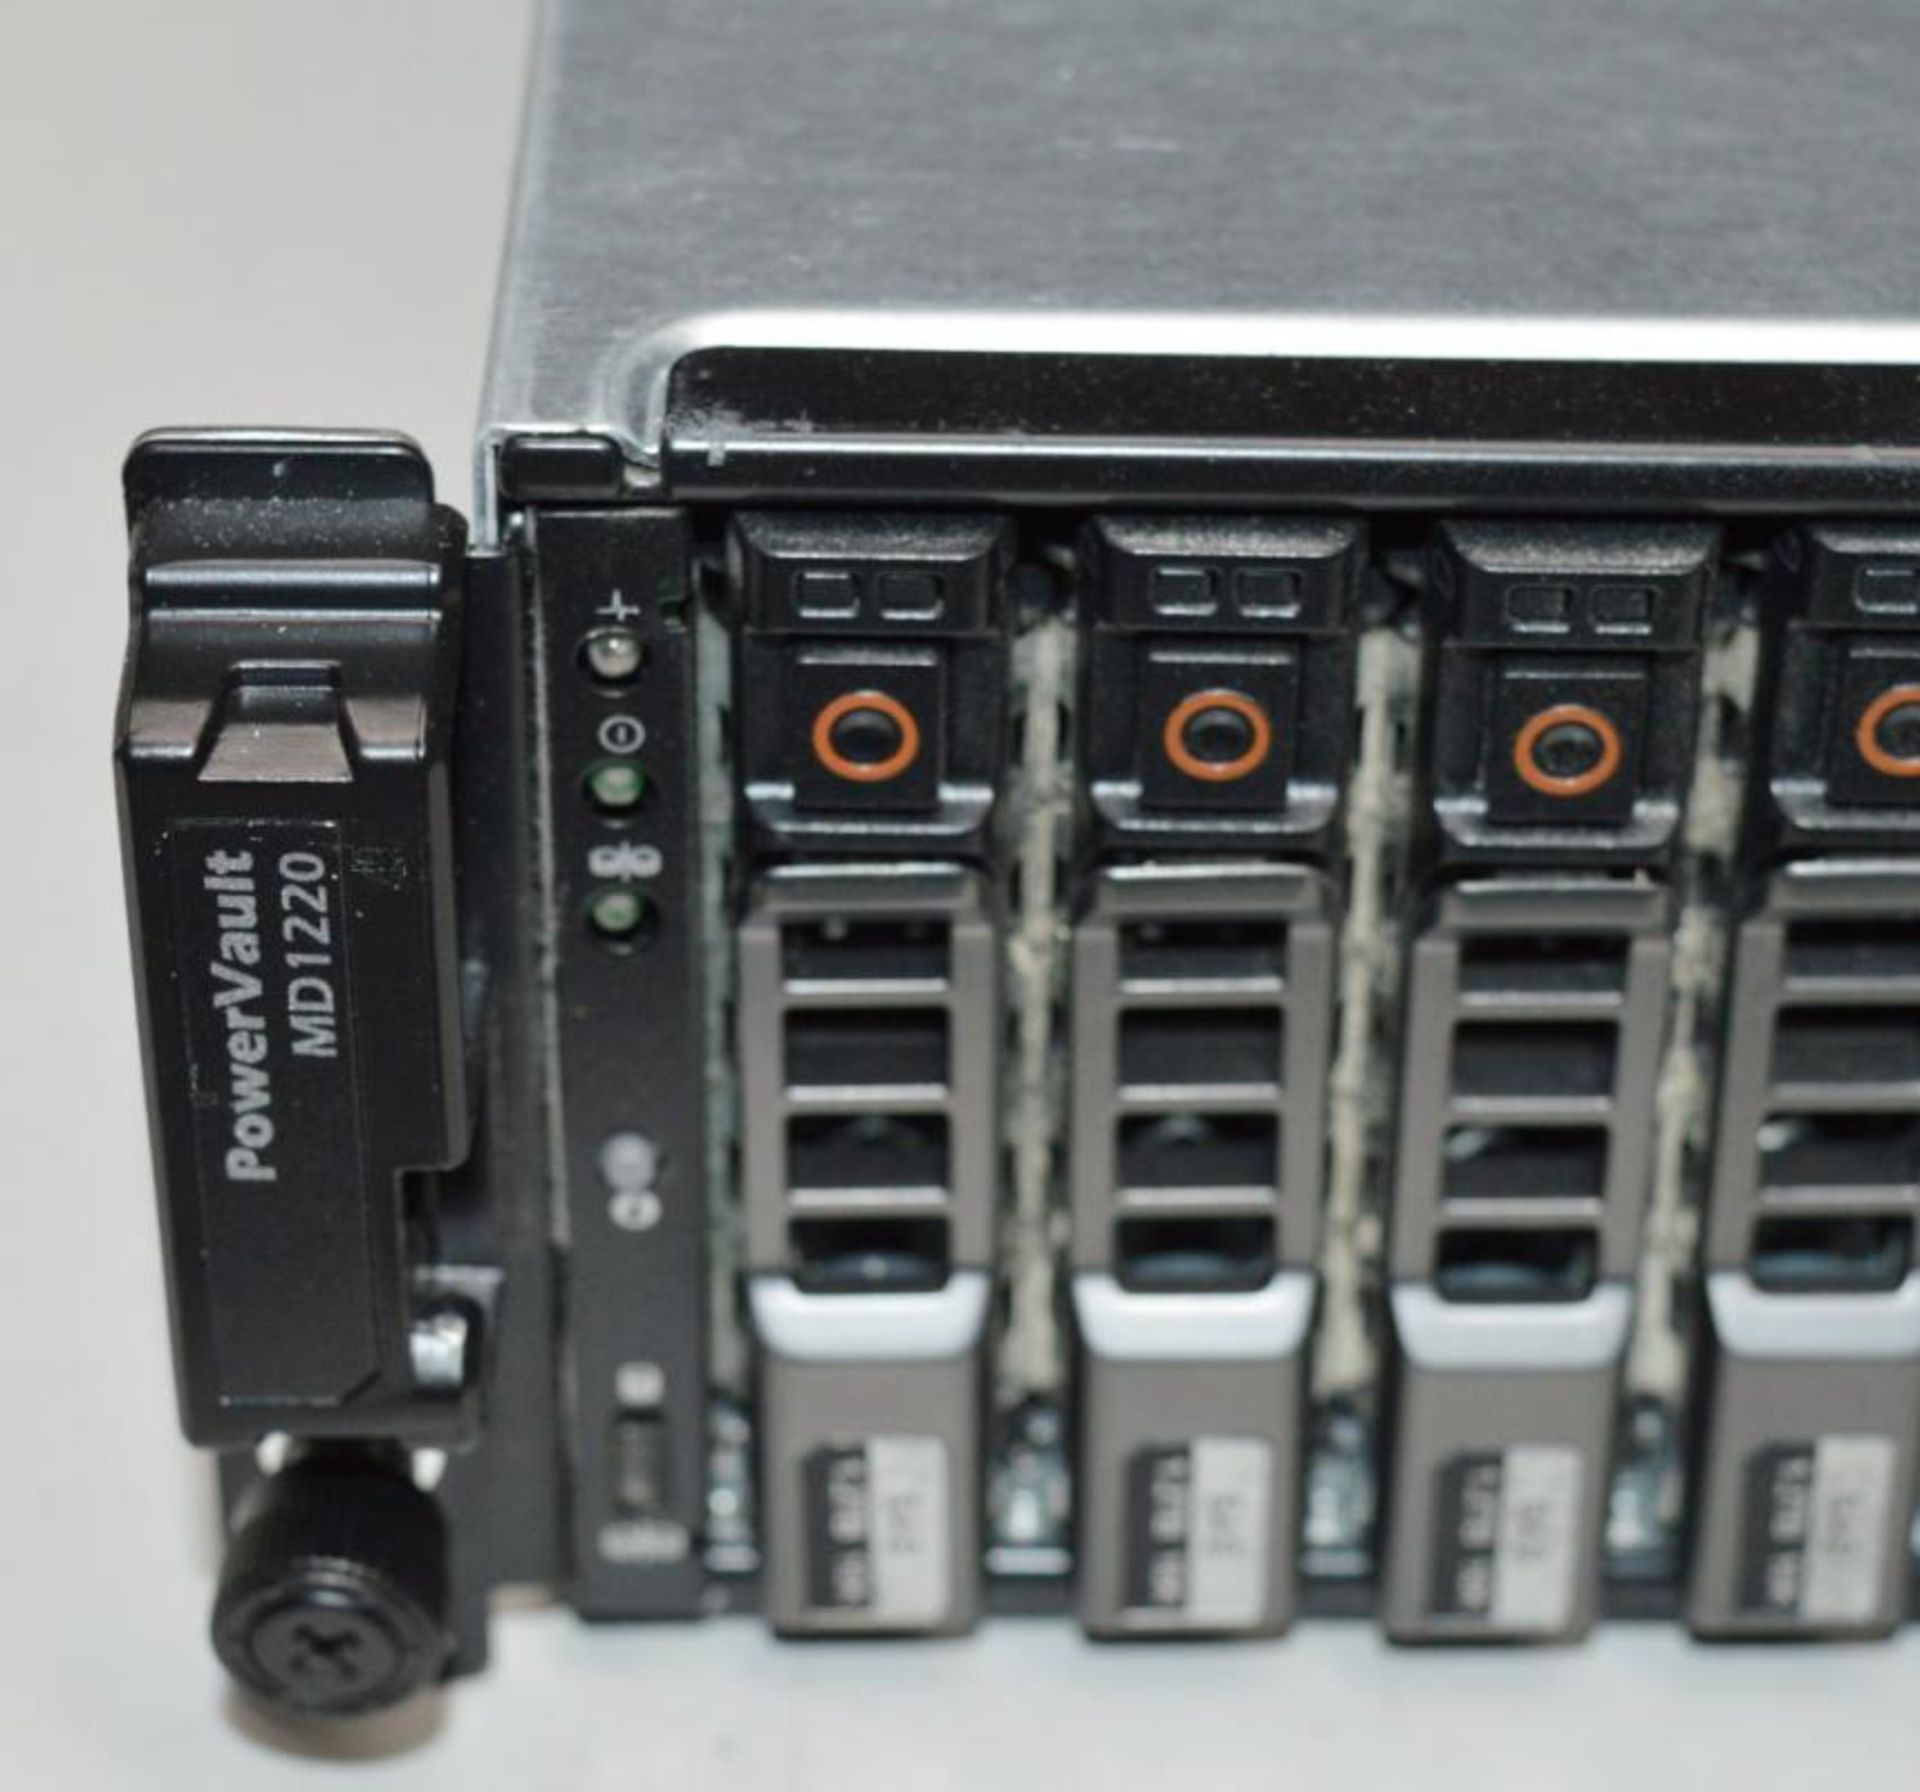 1 x Dell PowerVault MD1220 With Daul 600w PSU's and 2 x MD12 6Gb SAS Controllers - Image 2 of 8